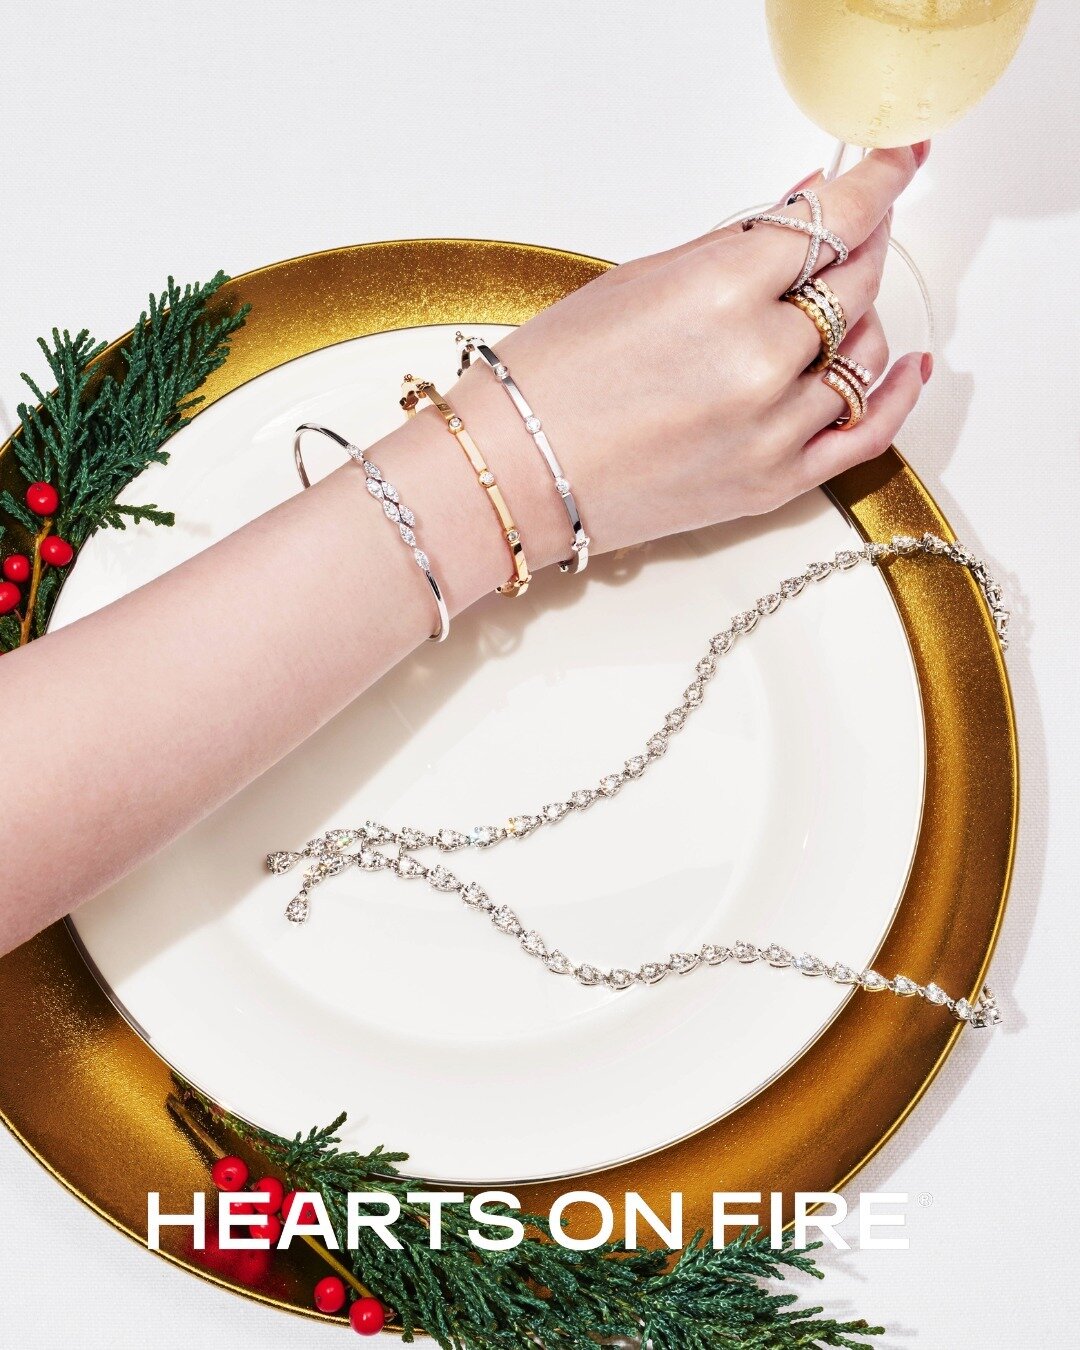 This holiday season, find the perfect gift. From contemporary pieces, to vintage-inspired styles, Hearts On Fire's stunning designs will be treasured by generations to come. @heartsonfire

Style: Aerial Marquise Flexi Bangle, Copley Multi Stone Bangl